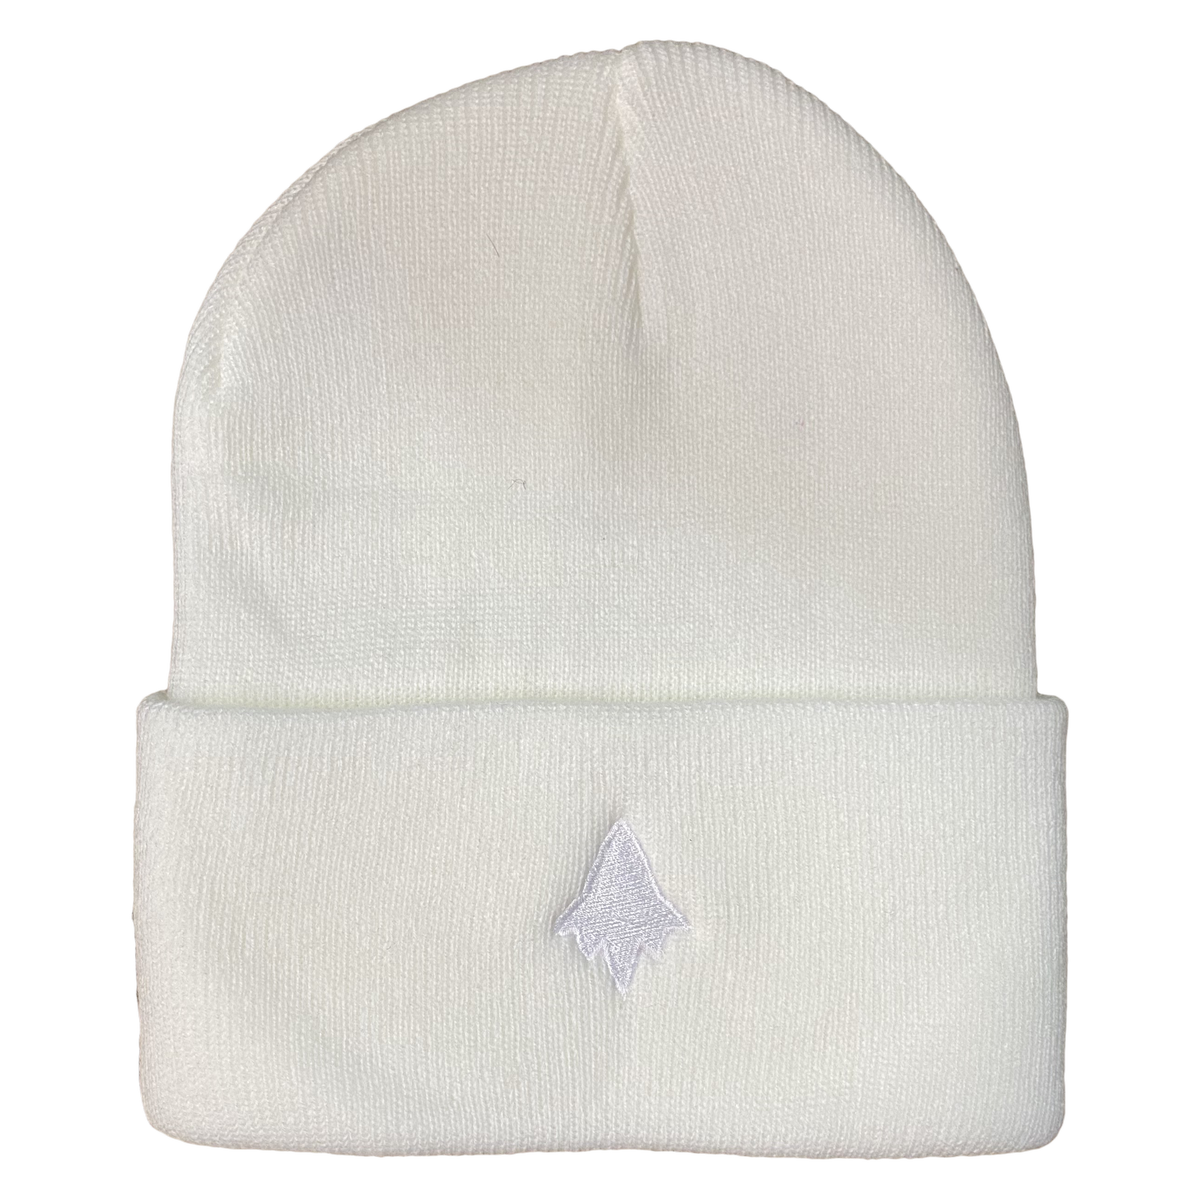 Infinity Shred - White Embroidered Beanie